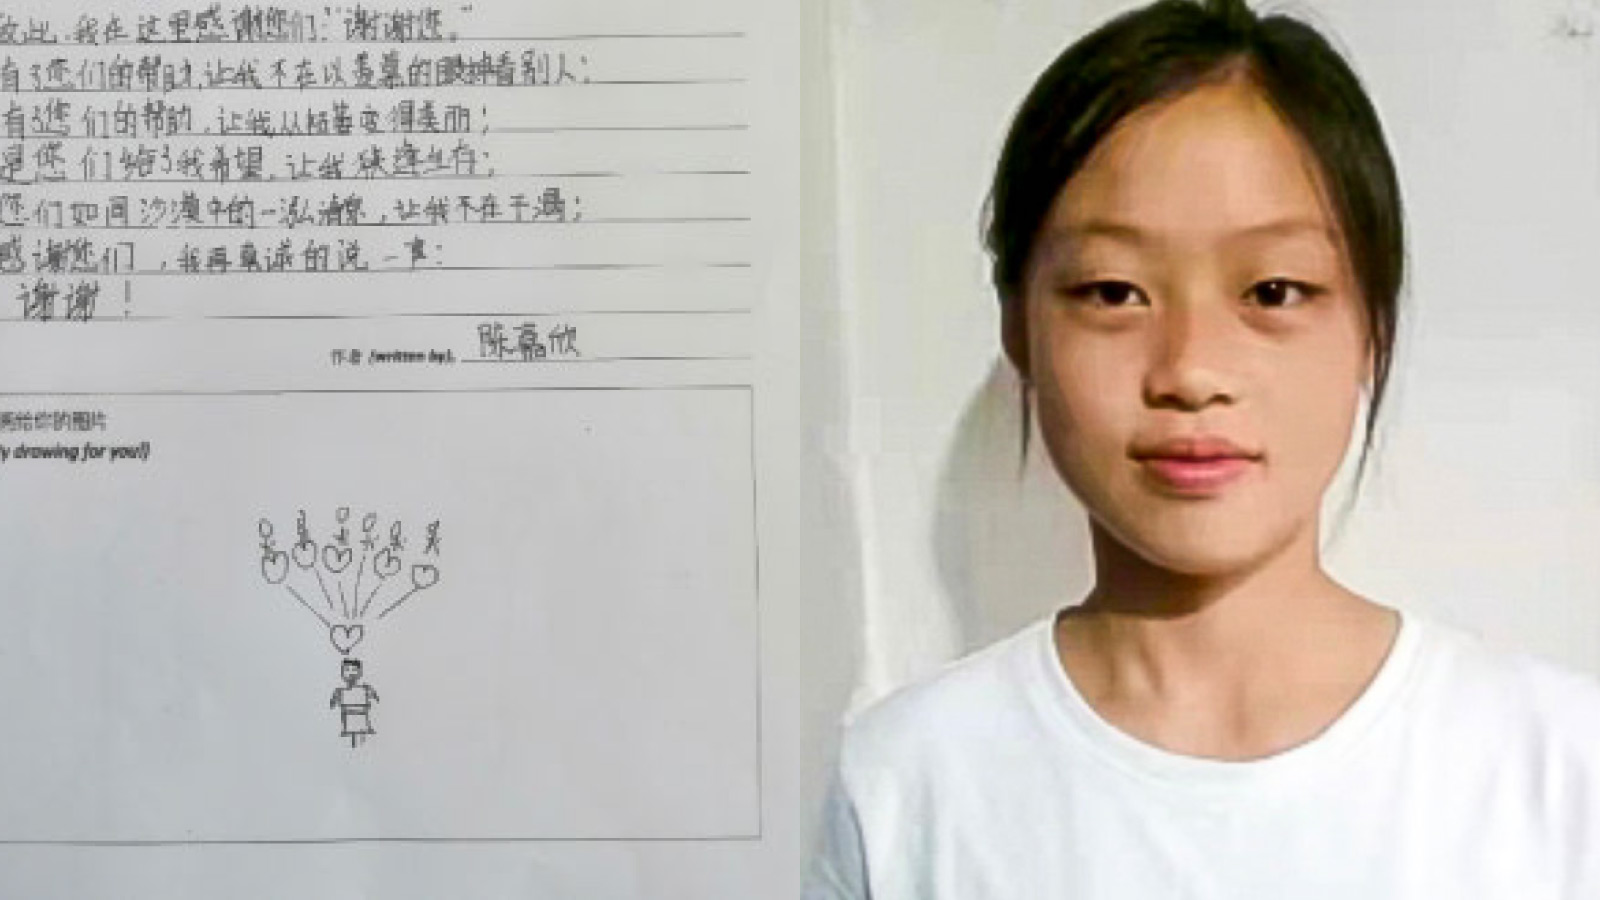 letter from sponsored child in china next to photo of sponsored girl